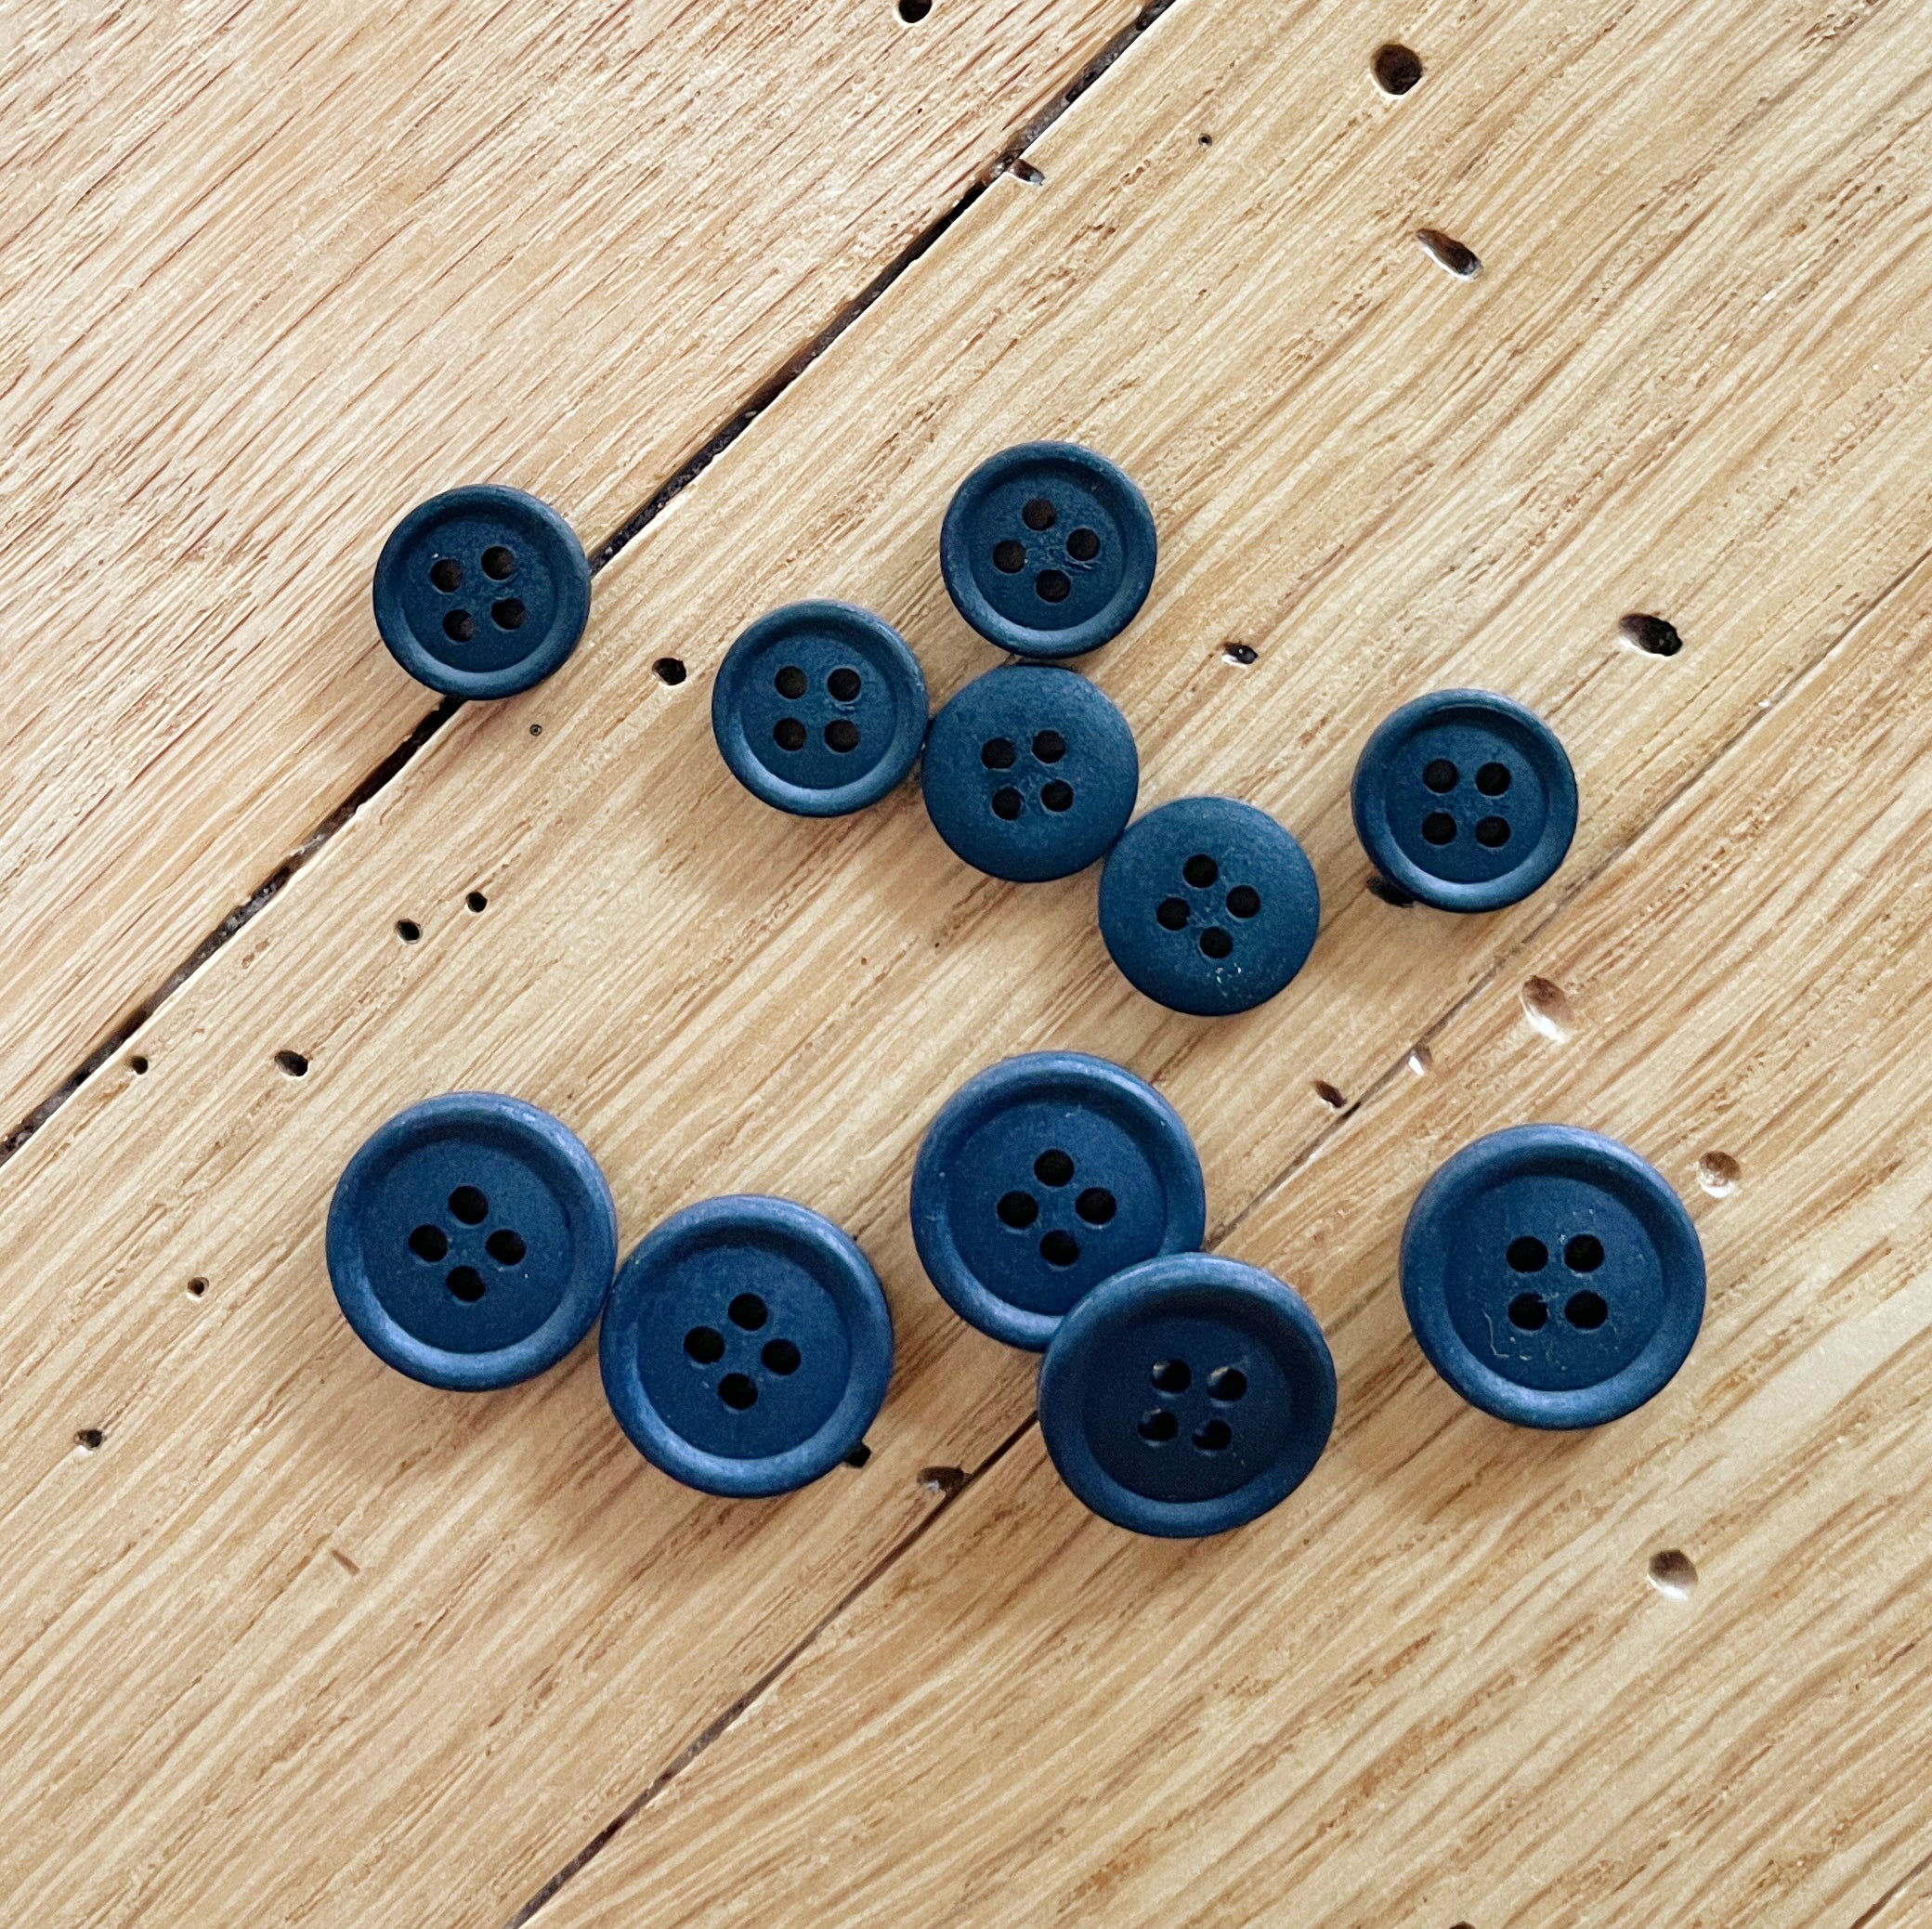 Easnea 20pcs Button With Cotton Fabric Covered Garment Buttons